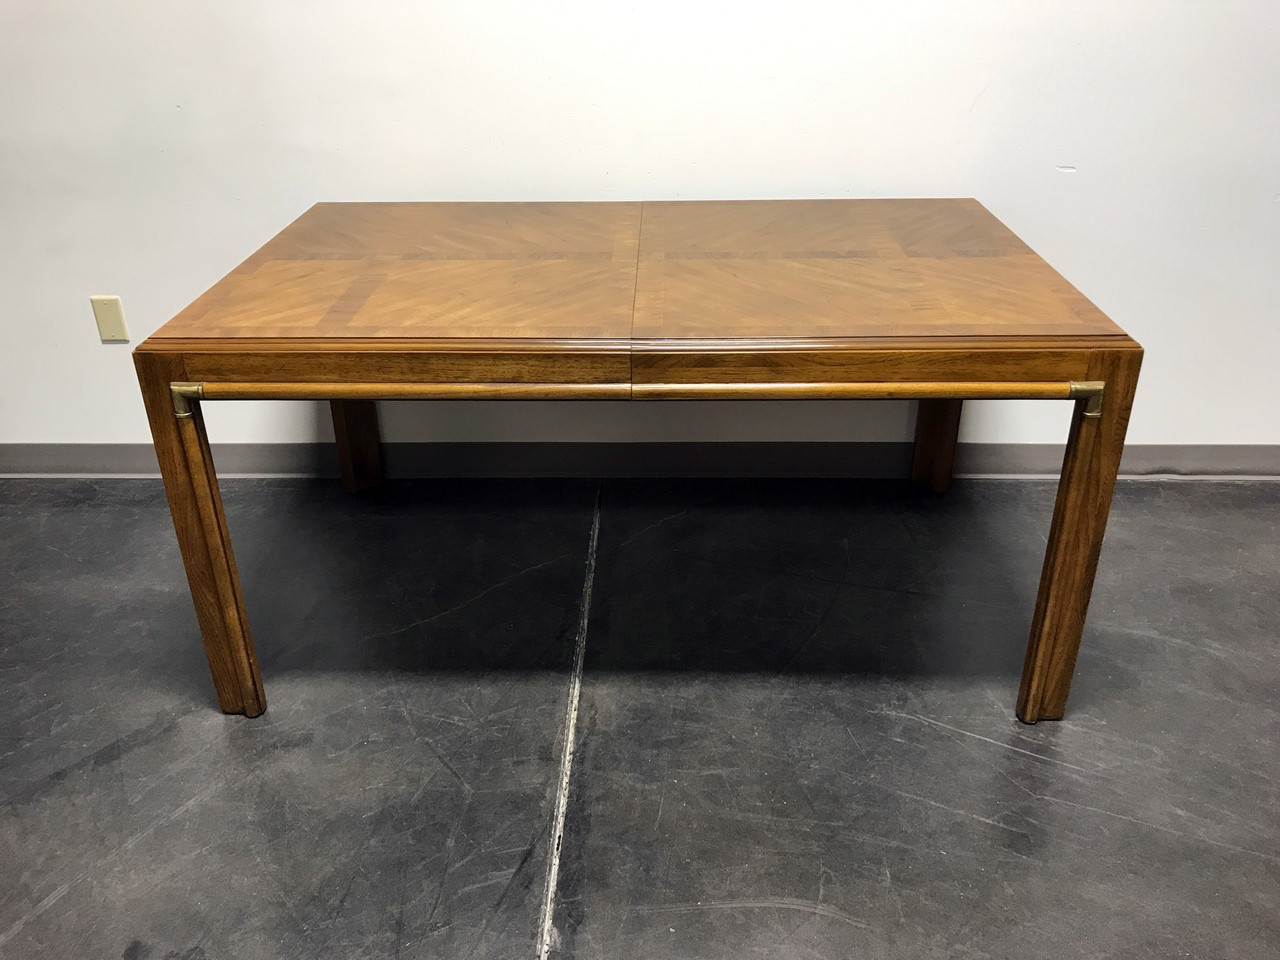 Sold Out Drexel Heritage Accolade Campaign Style Dining Table